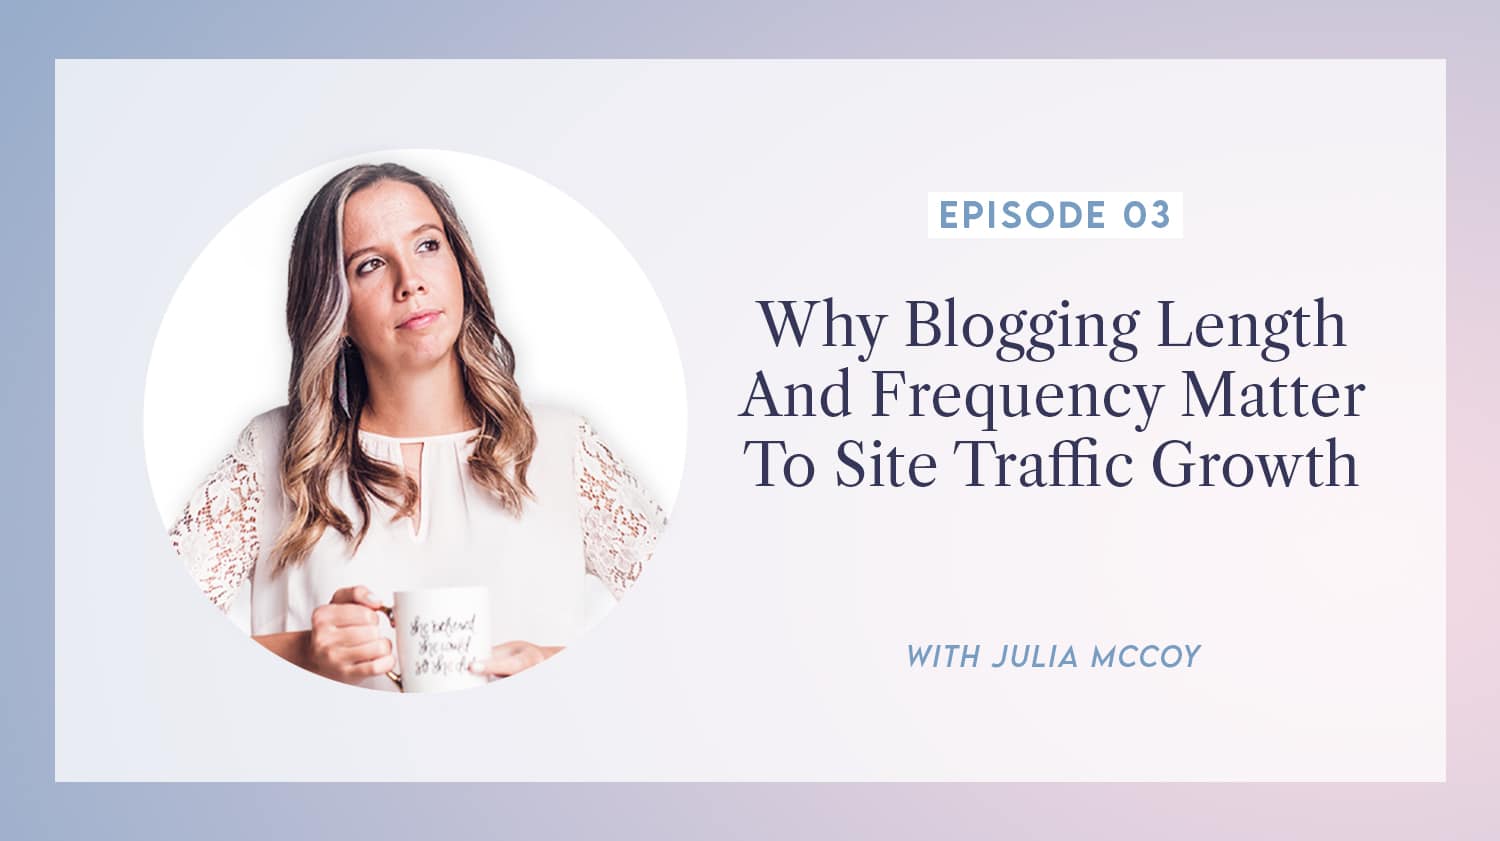 content transformation podcast with julia mccoy episode 3 why blogging length matters to massive site growth